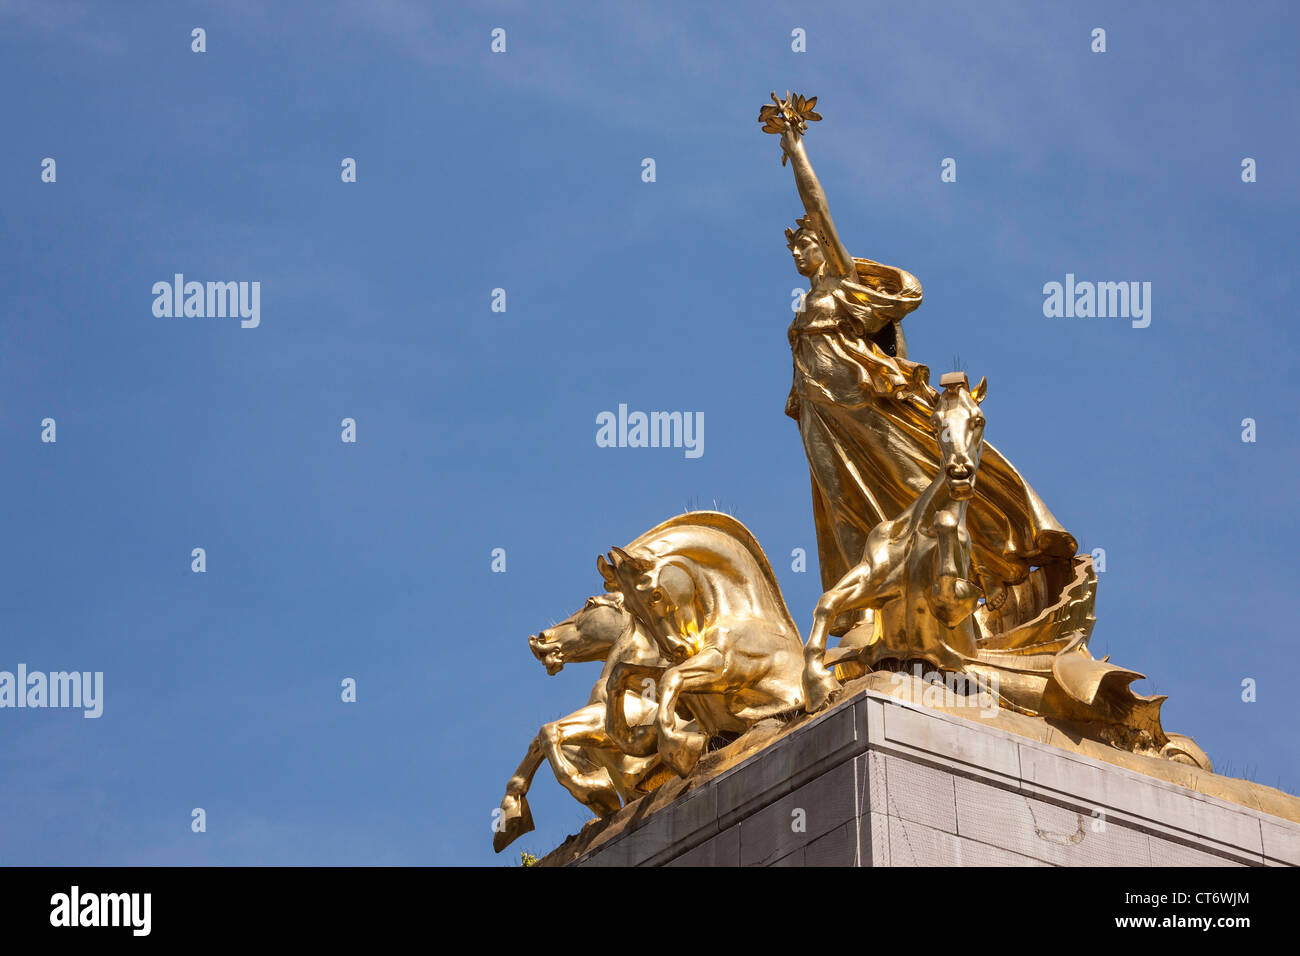 Maine Monument at Merchant's Gate, Central Park, Manhattan, New York City, NYC Stock Photo